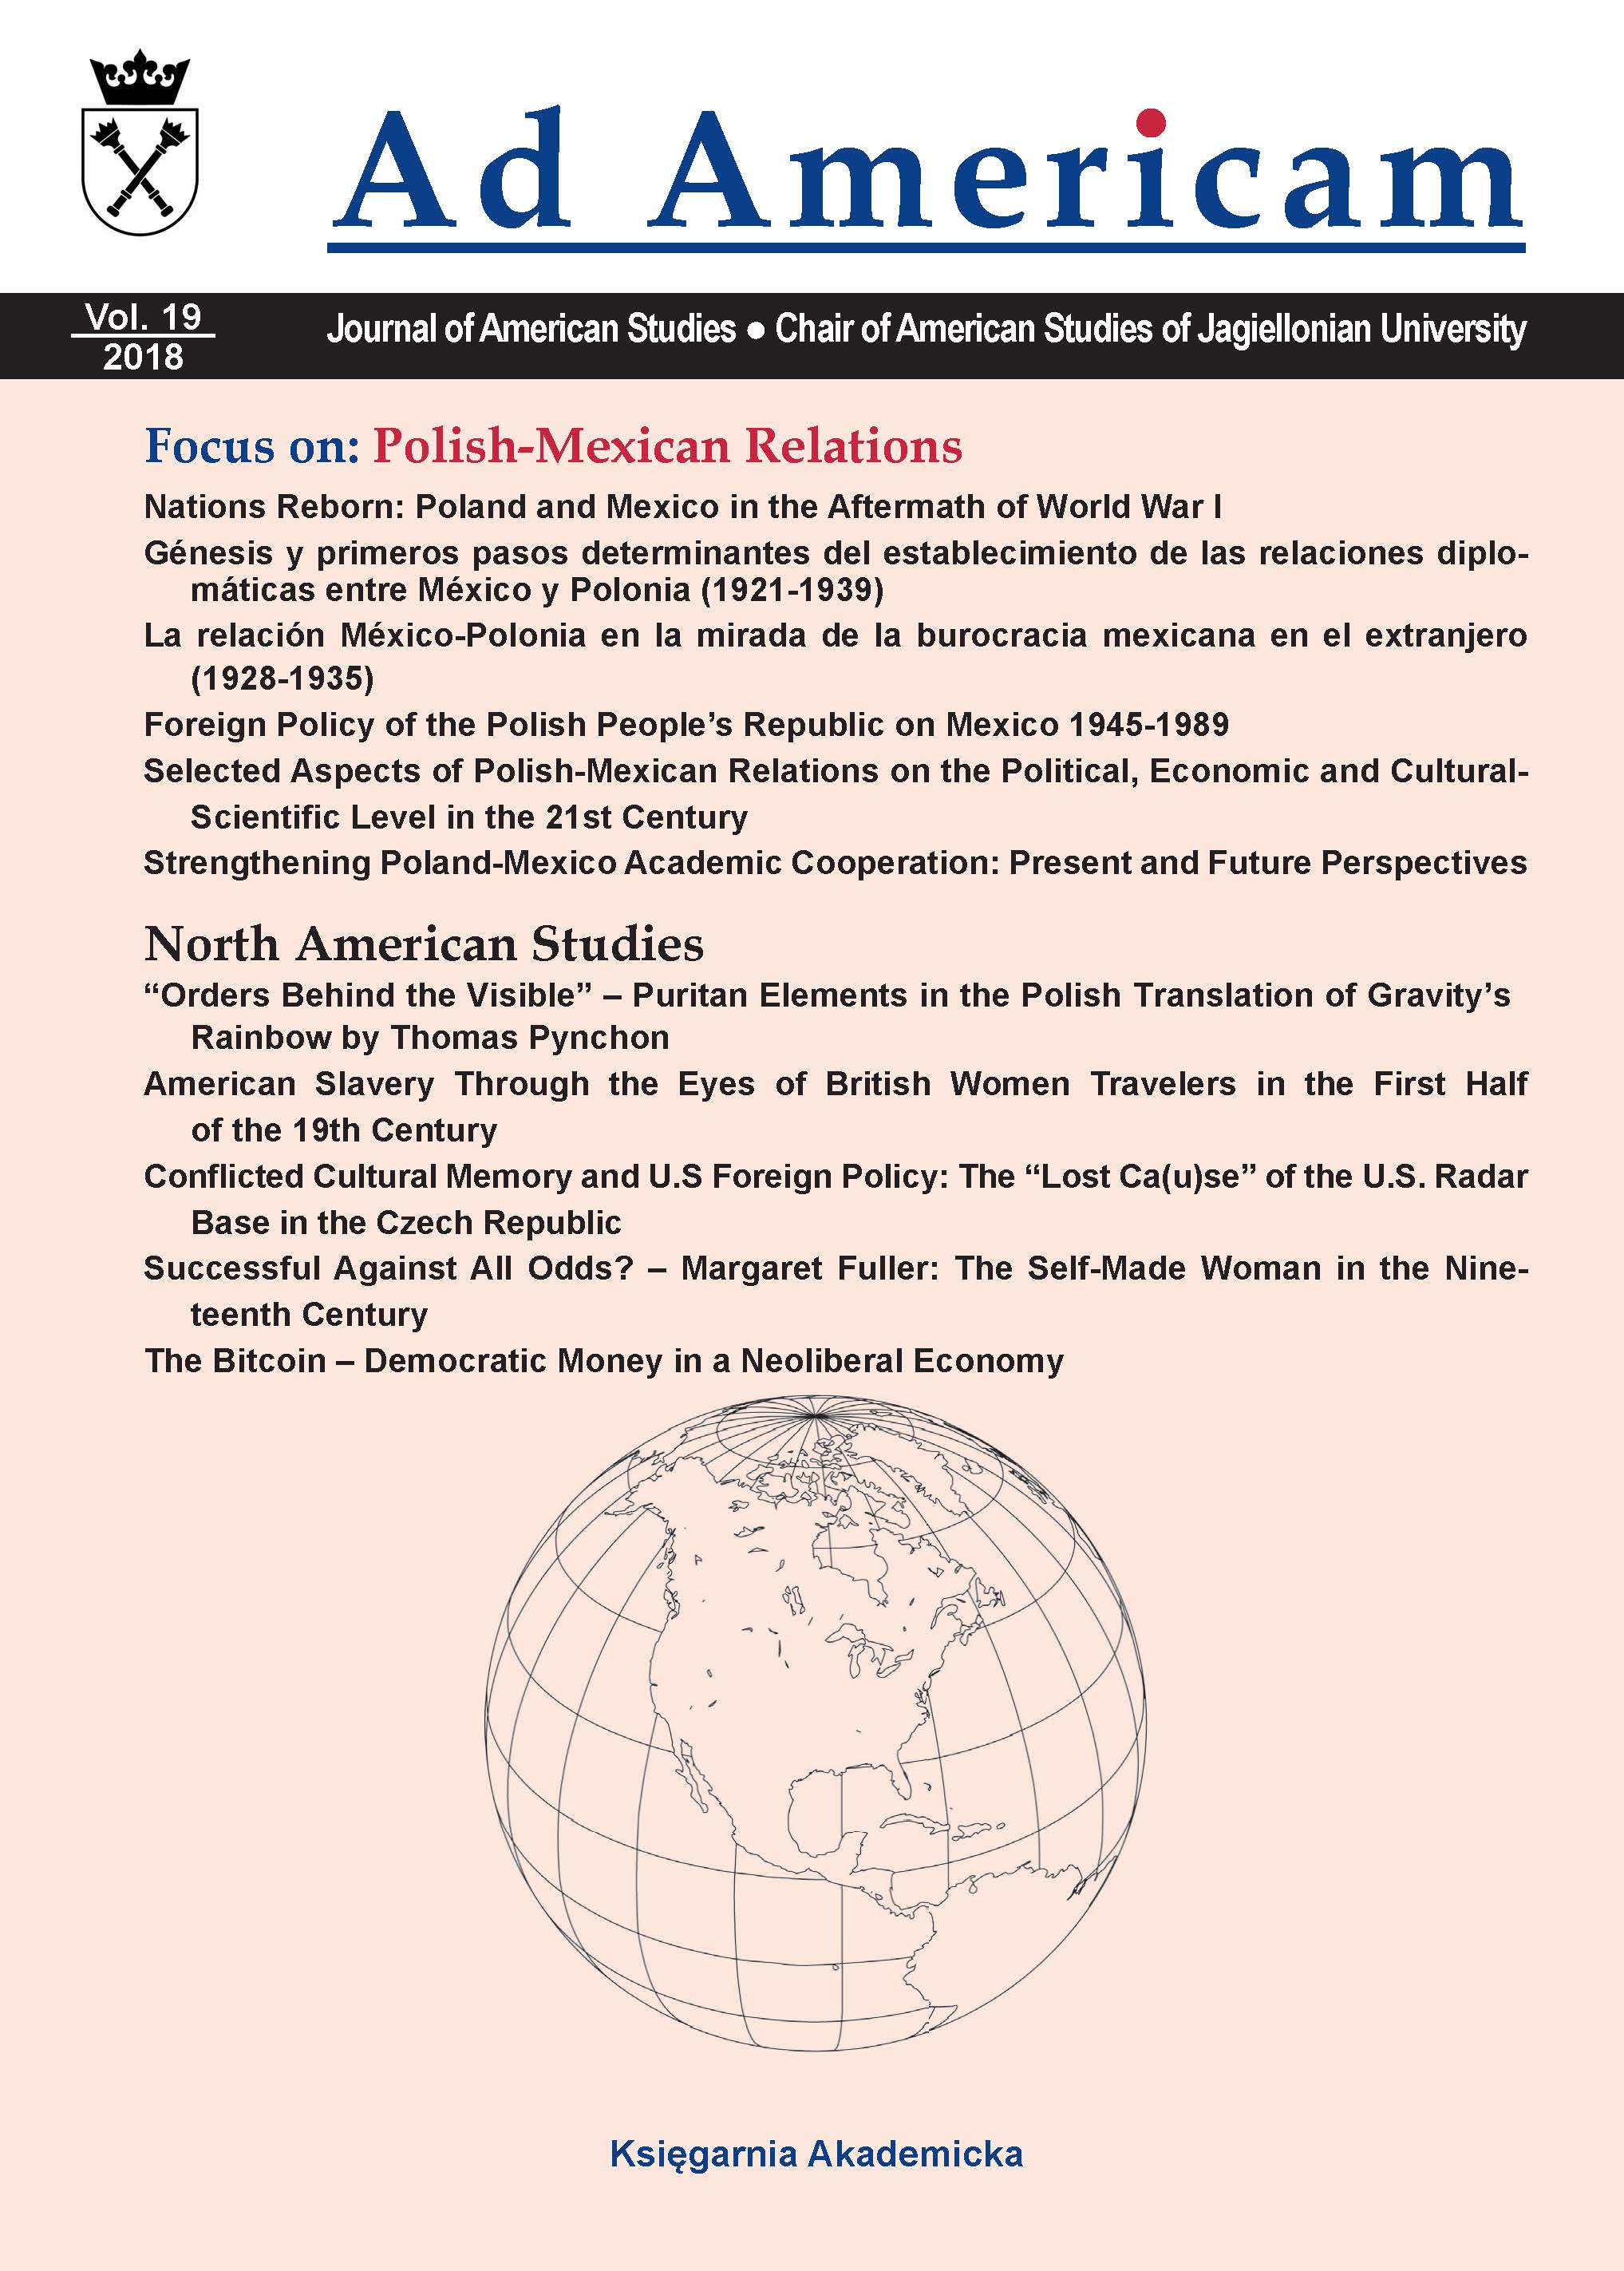 Genesis and First Steps Determining the Establishment of Diplomatic Relations Between Mexico and Poland (1921-1939) Cover Image